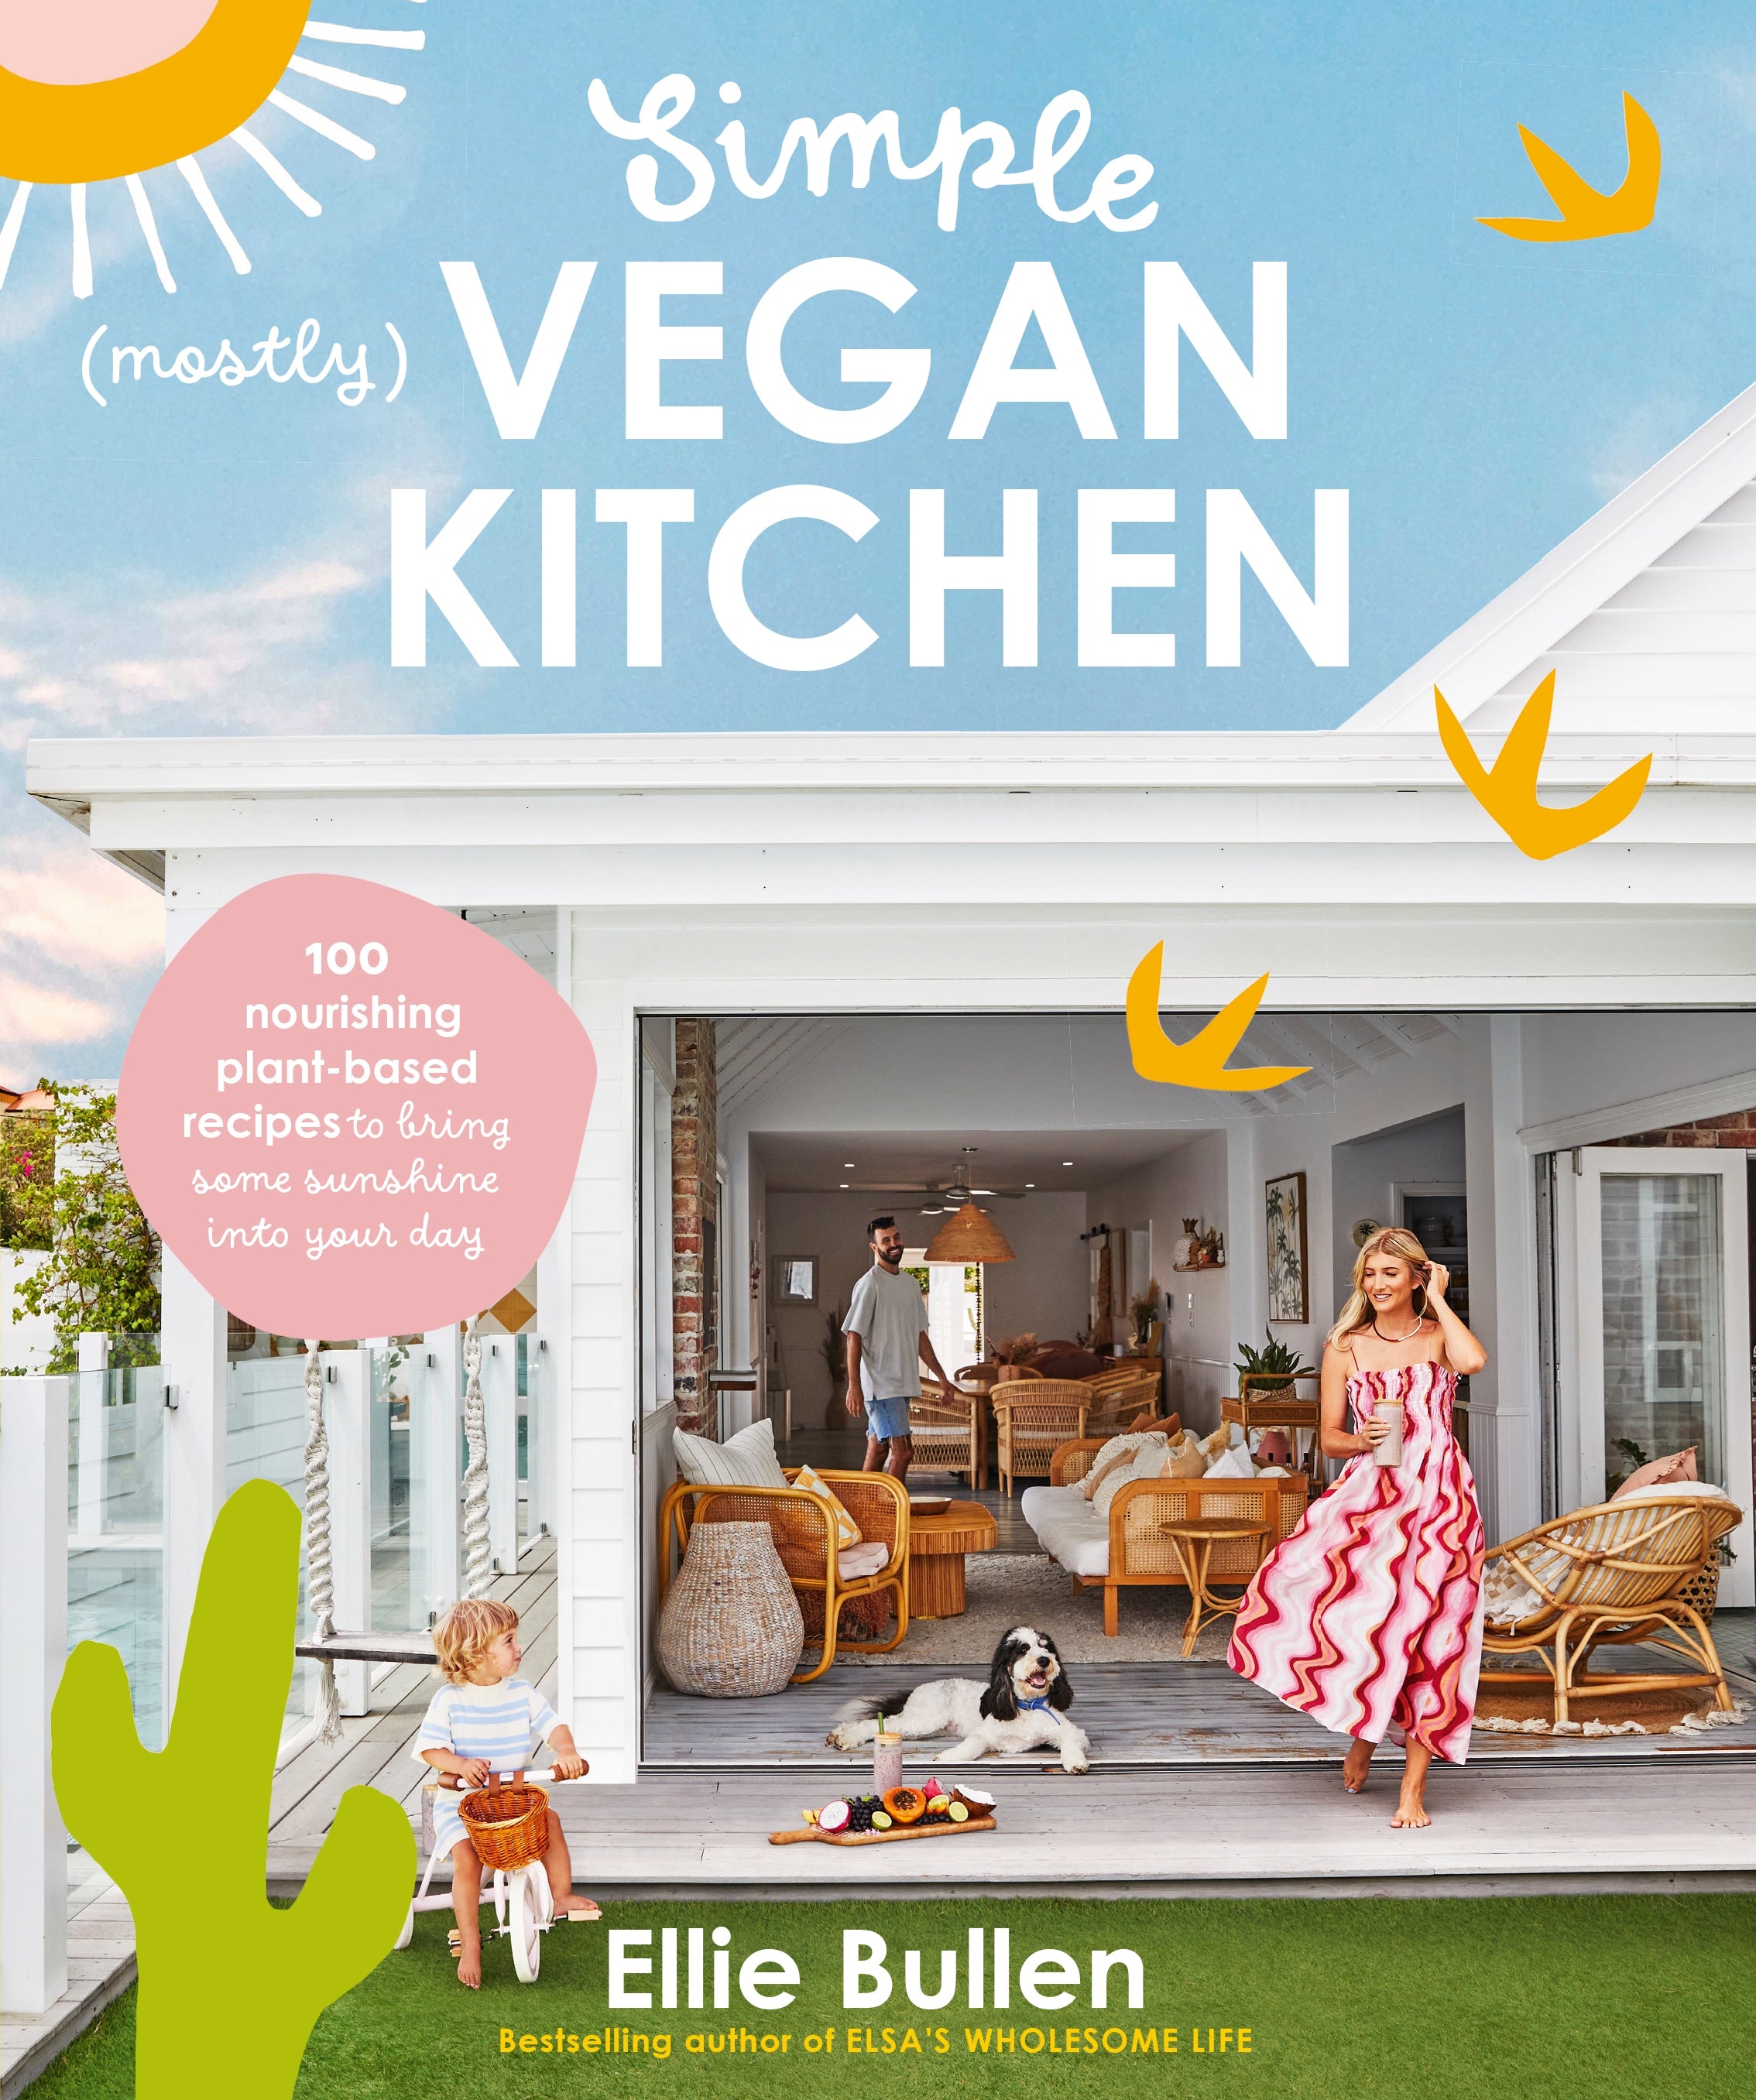 Vegan　The　Simple　Wholesome　–　(Mostly)　Kitchen　Store